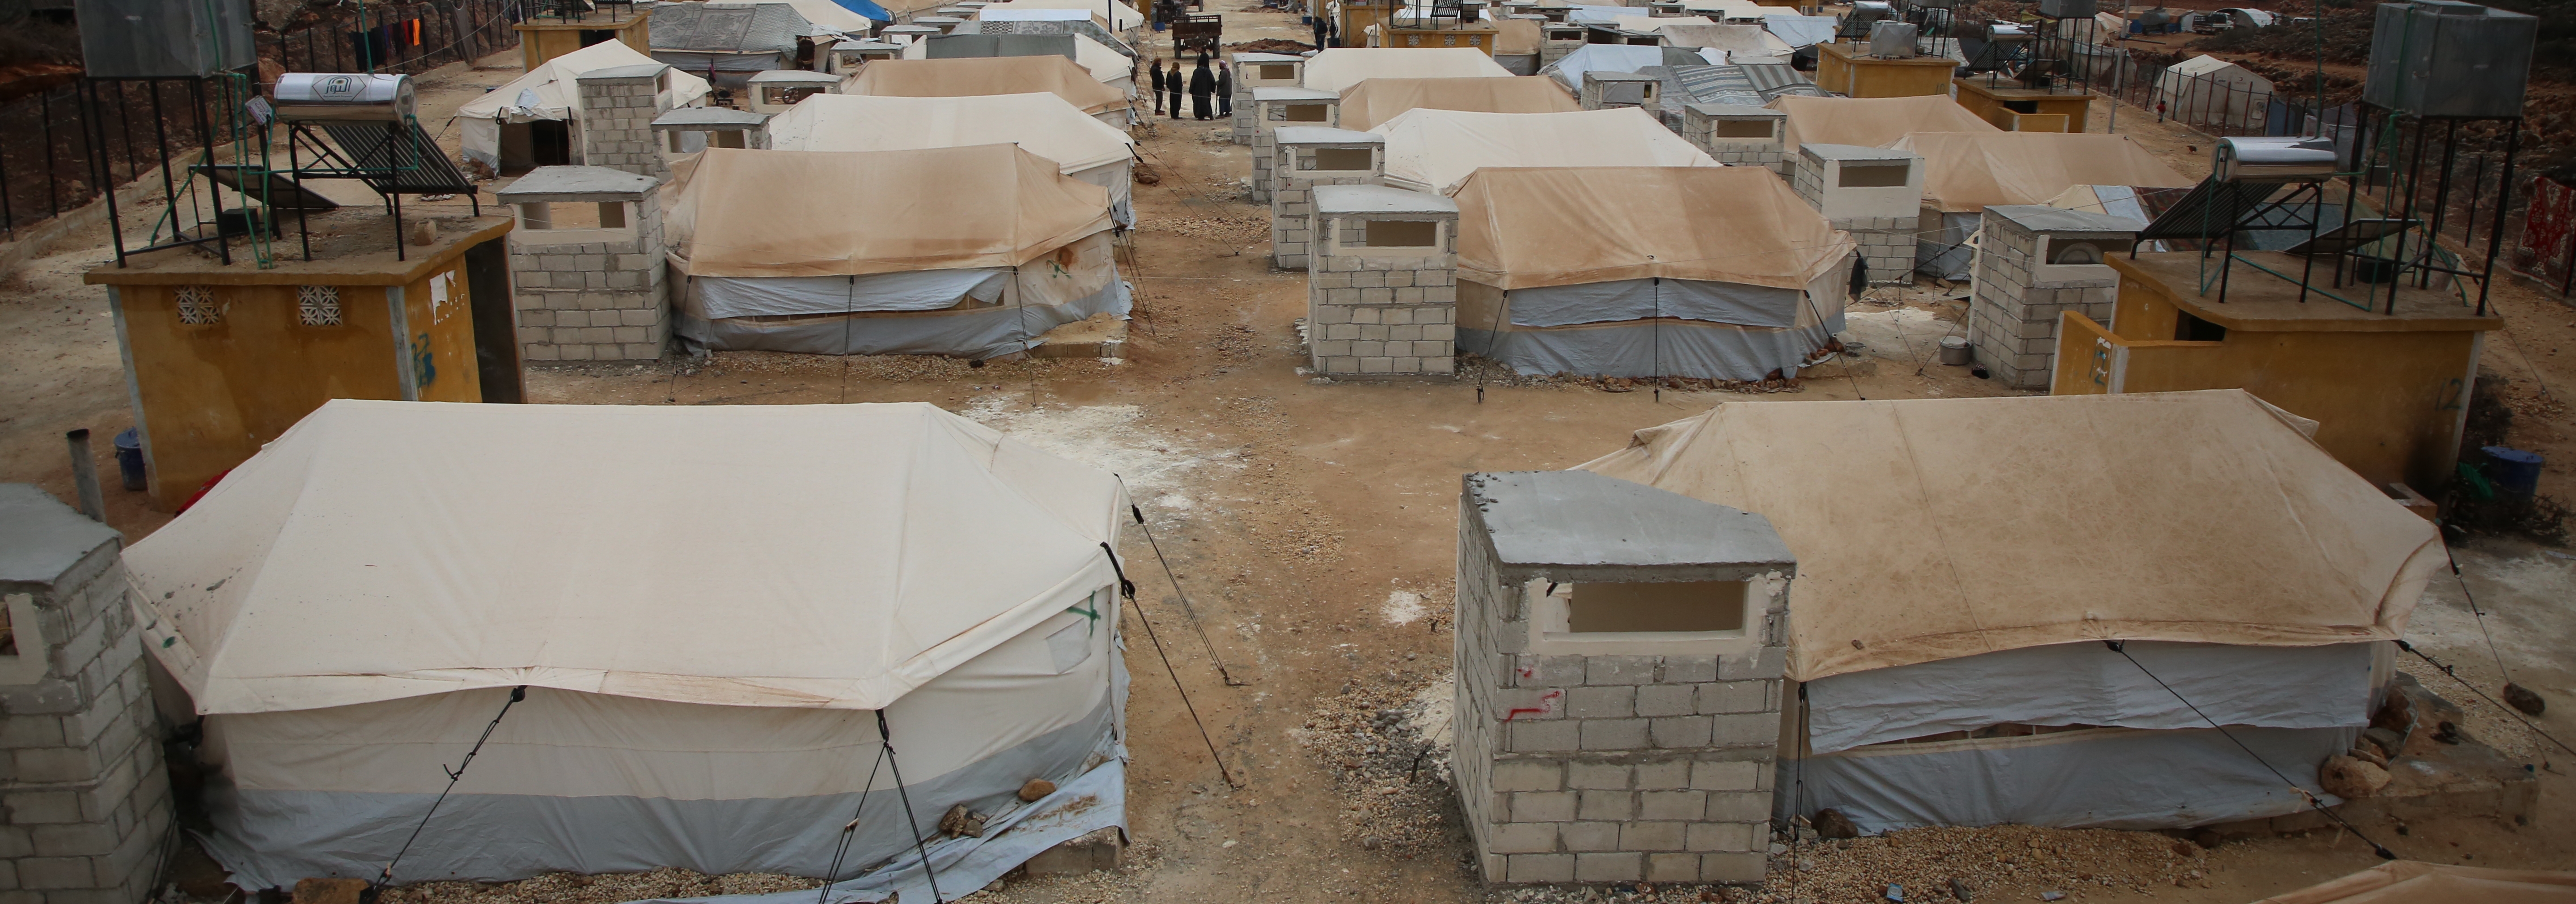 An aerial view of one of ten new camps established by IOM in northwest Syria. The camps provide shelter to approximately 25,000 IDPs. © IOM Turkey.